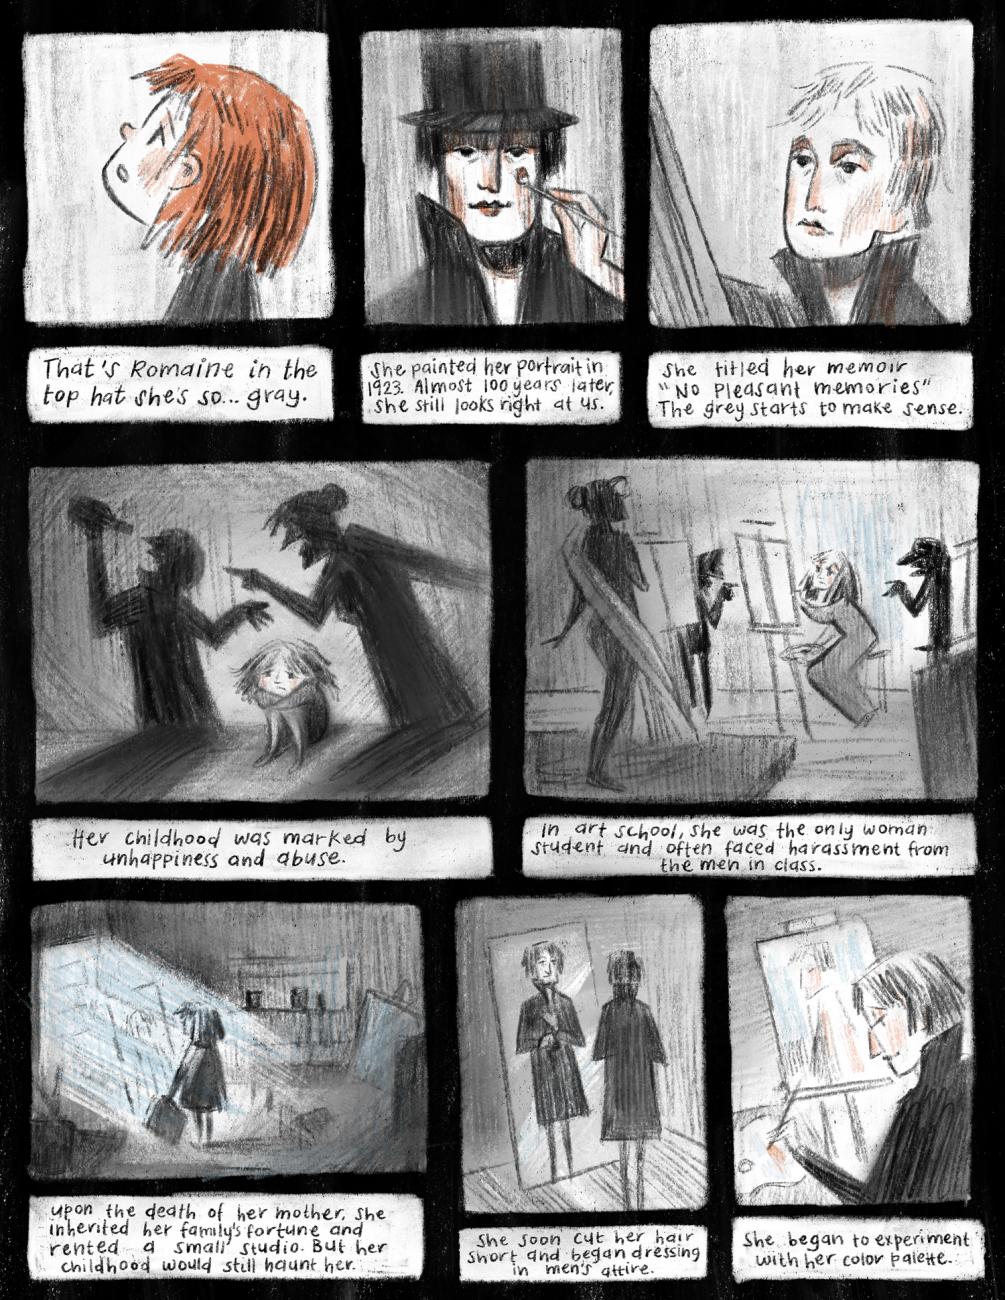 Do You Think I’m Hiding? A Comic About Romaine Brooks, page one